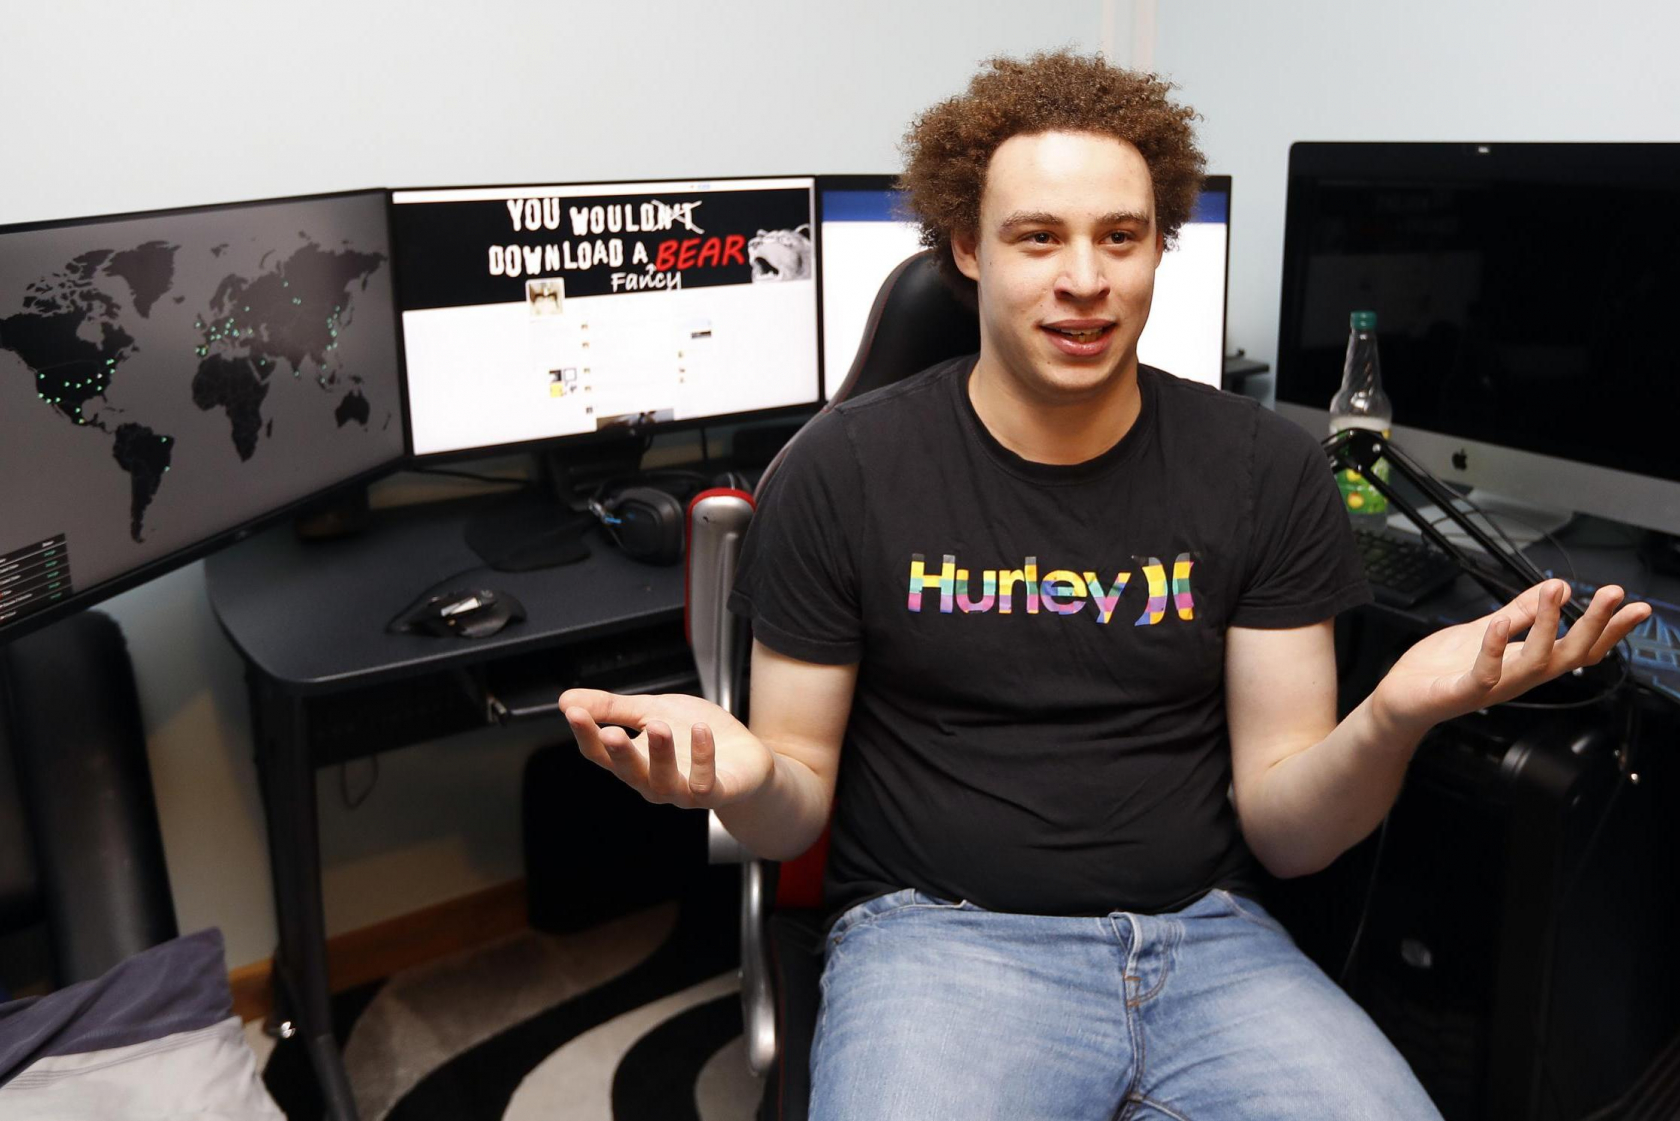 Marcus Hutchins will plead not guilty to malware creation charges, bail set at $30,000